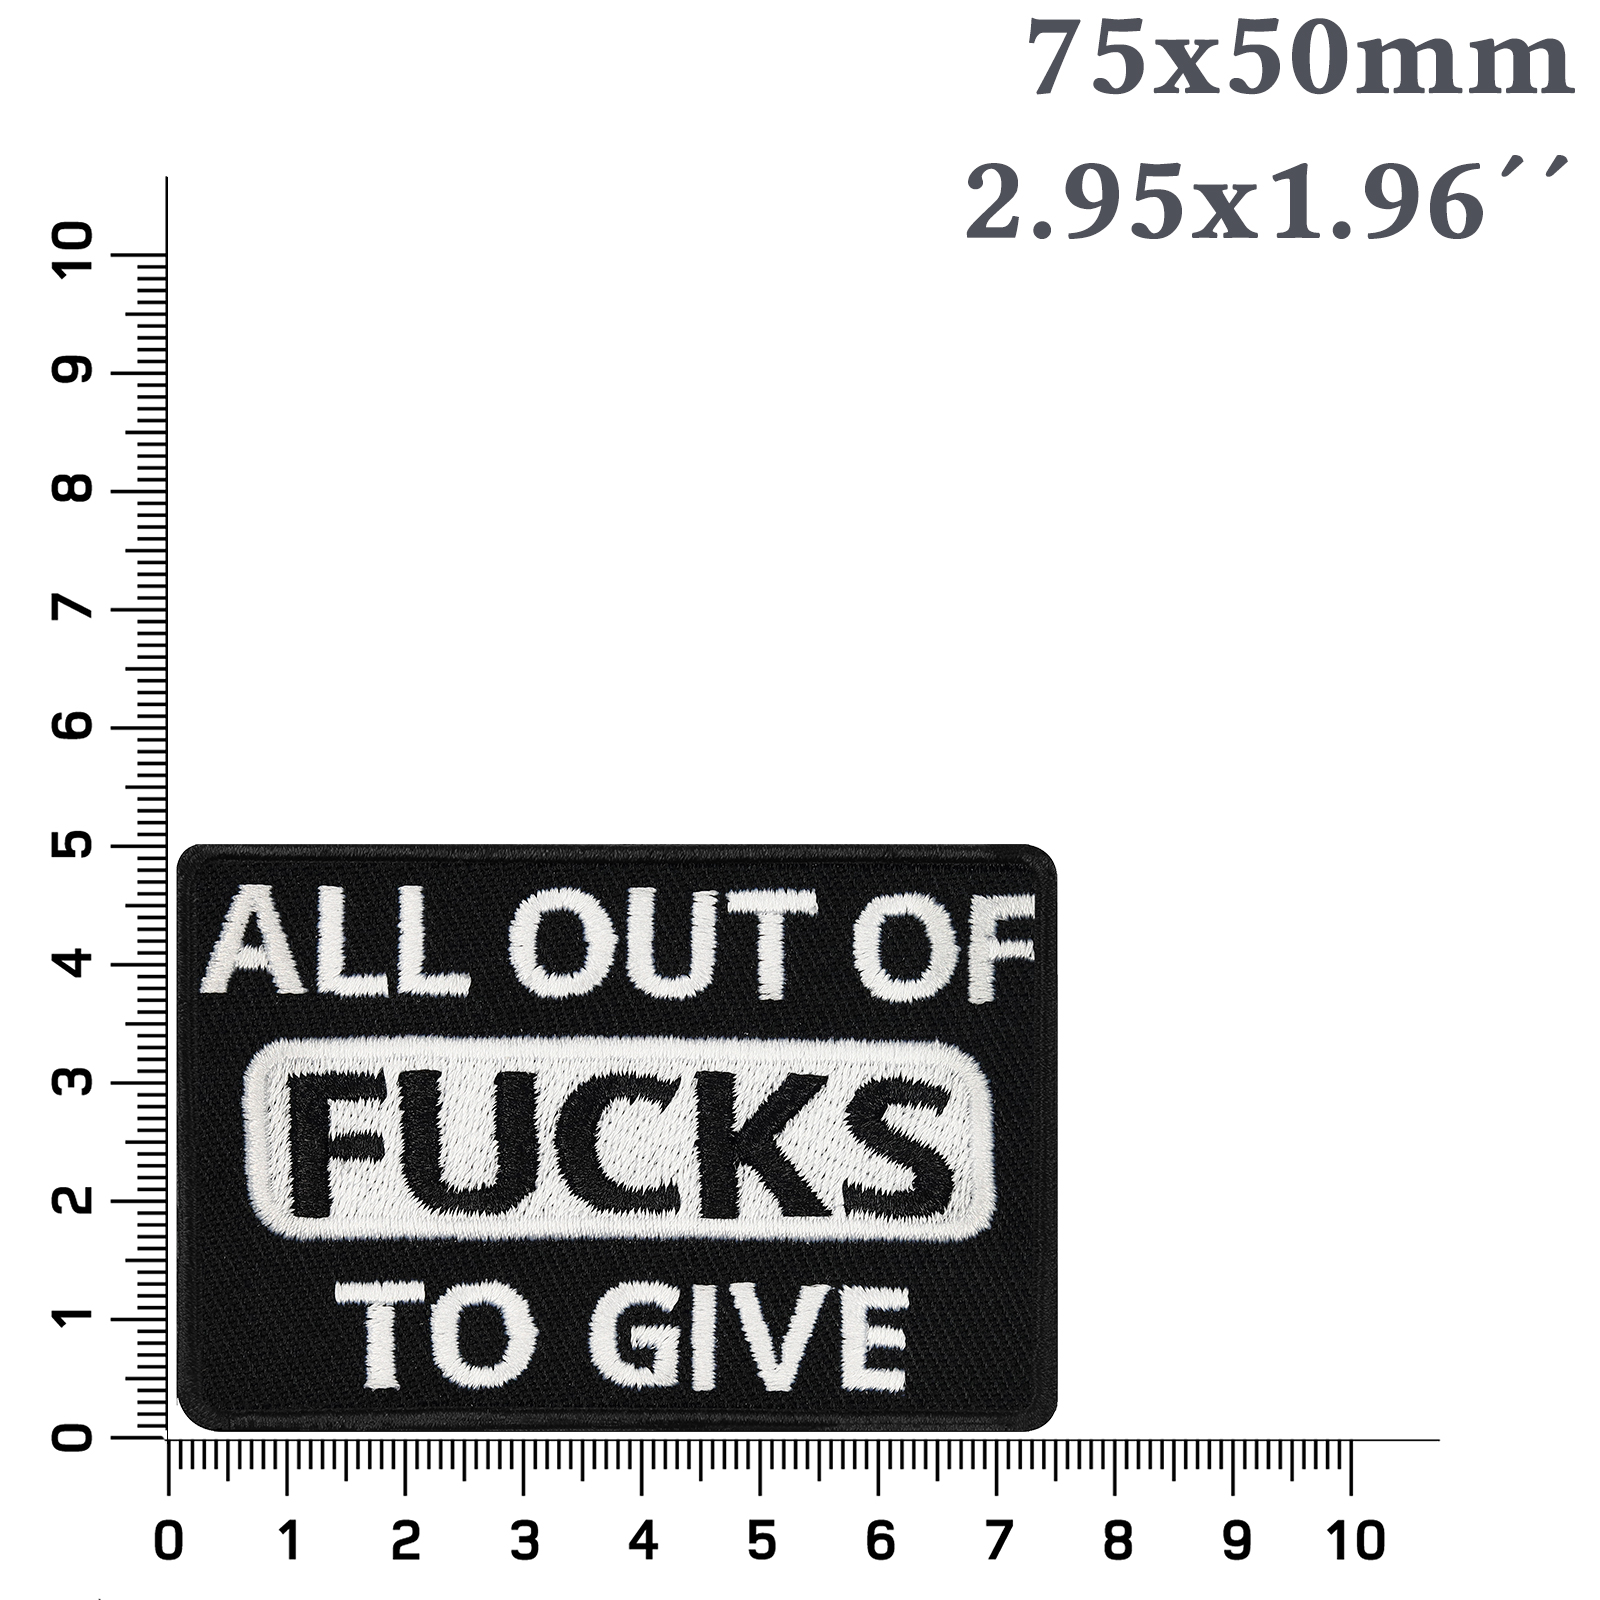 All out of fucks to give - Patch